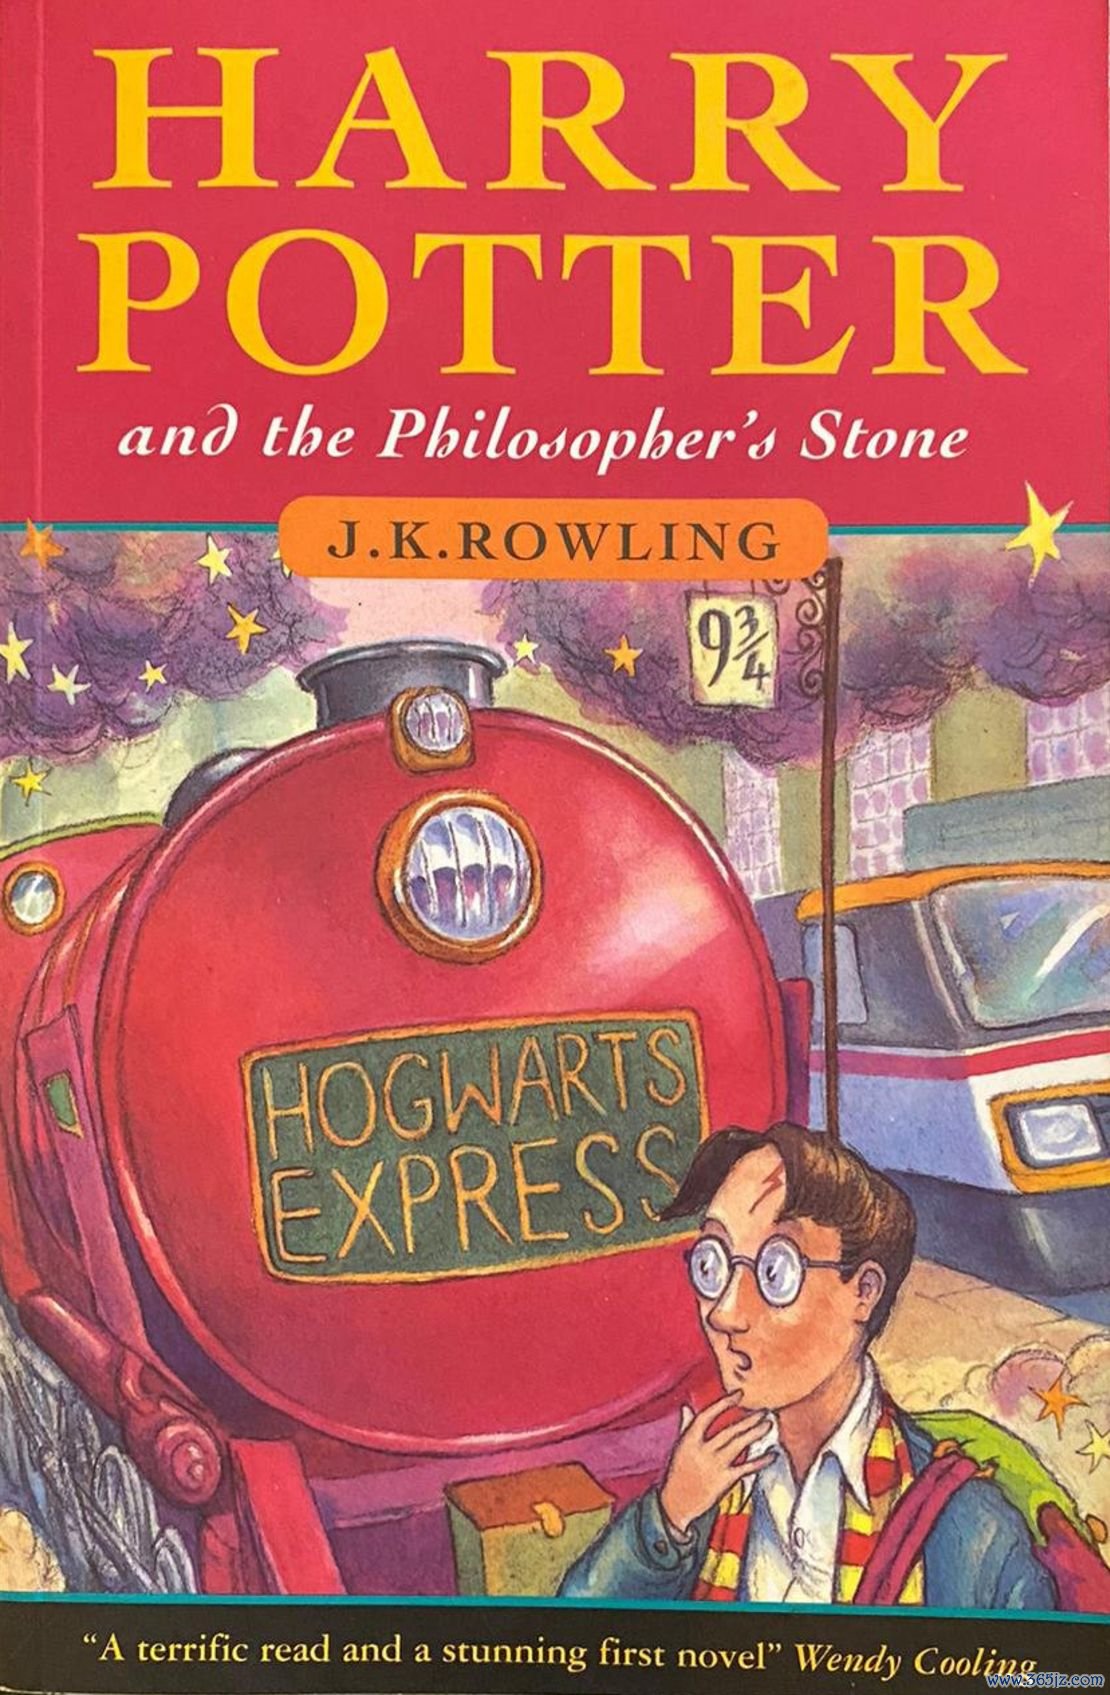 The first edition of 1997 book "Harry Potter and the Philosopher's Stone" -- which Taylor illustrated.